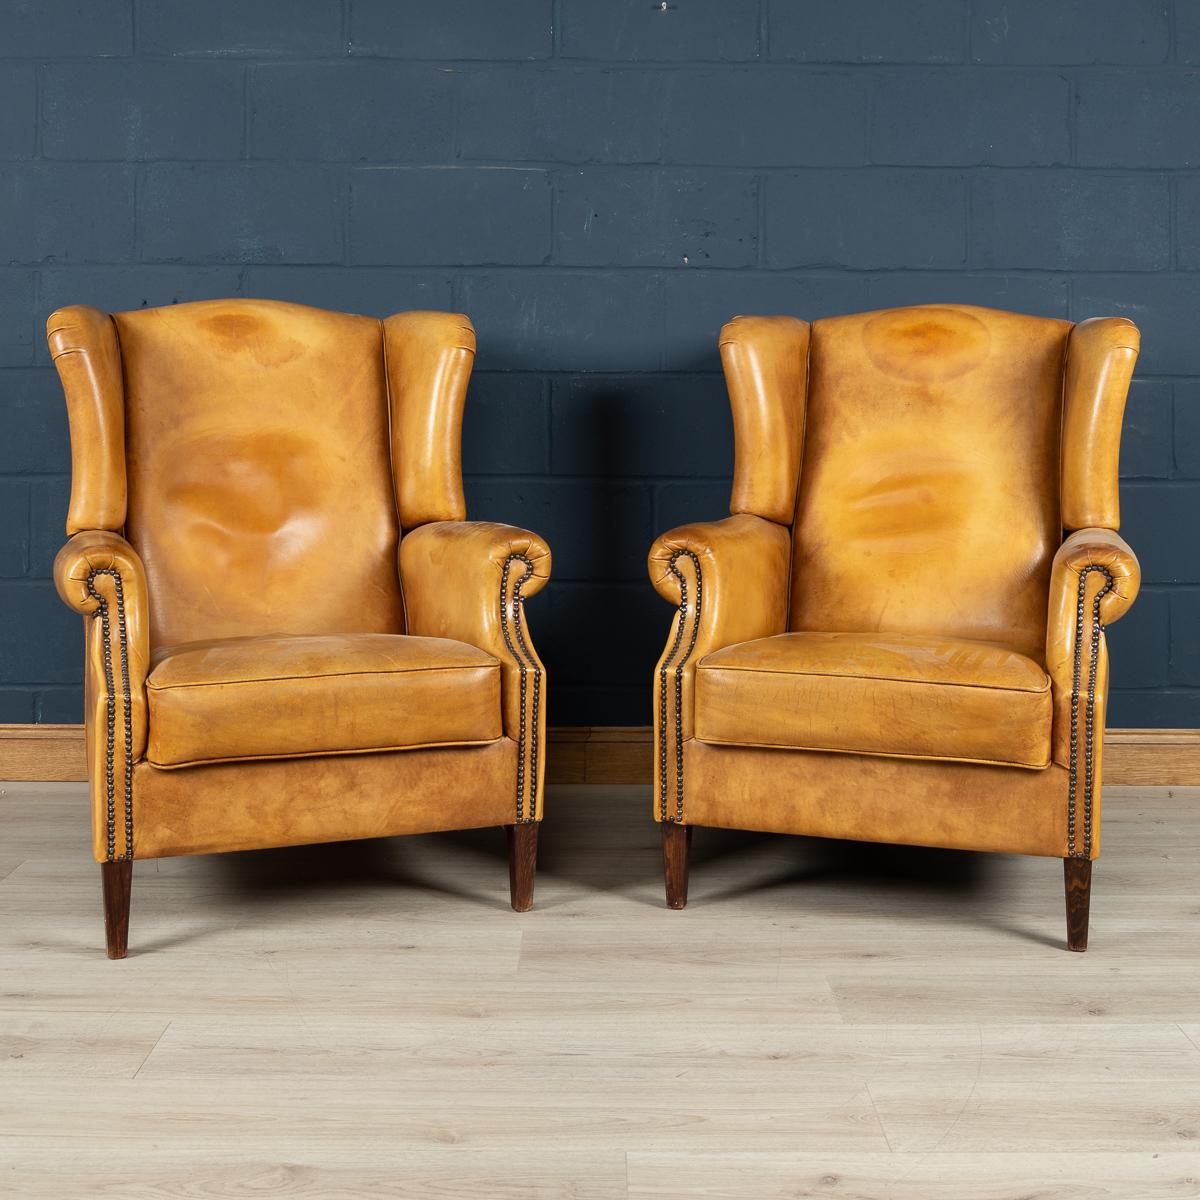 A wonderful pair of leather wing back armchairs. Dating to the latter part of the 20th century these chairs were realised by the finest Dutch craftsmen, the solid wood frame upholstered in superb quality sheepskin leather which over the years have